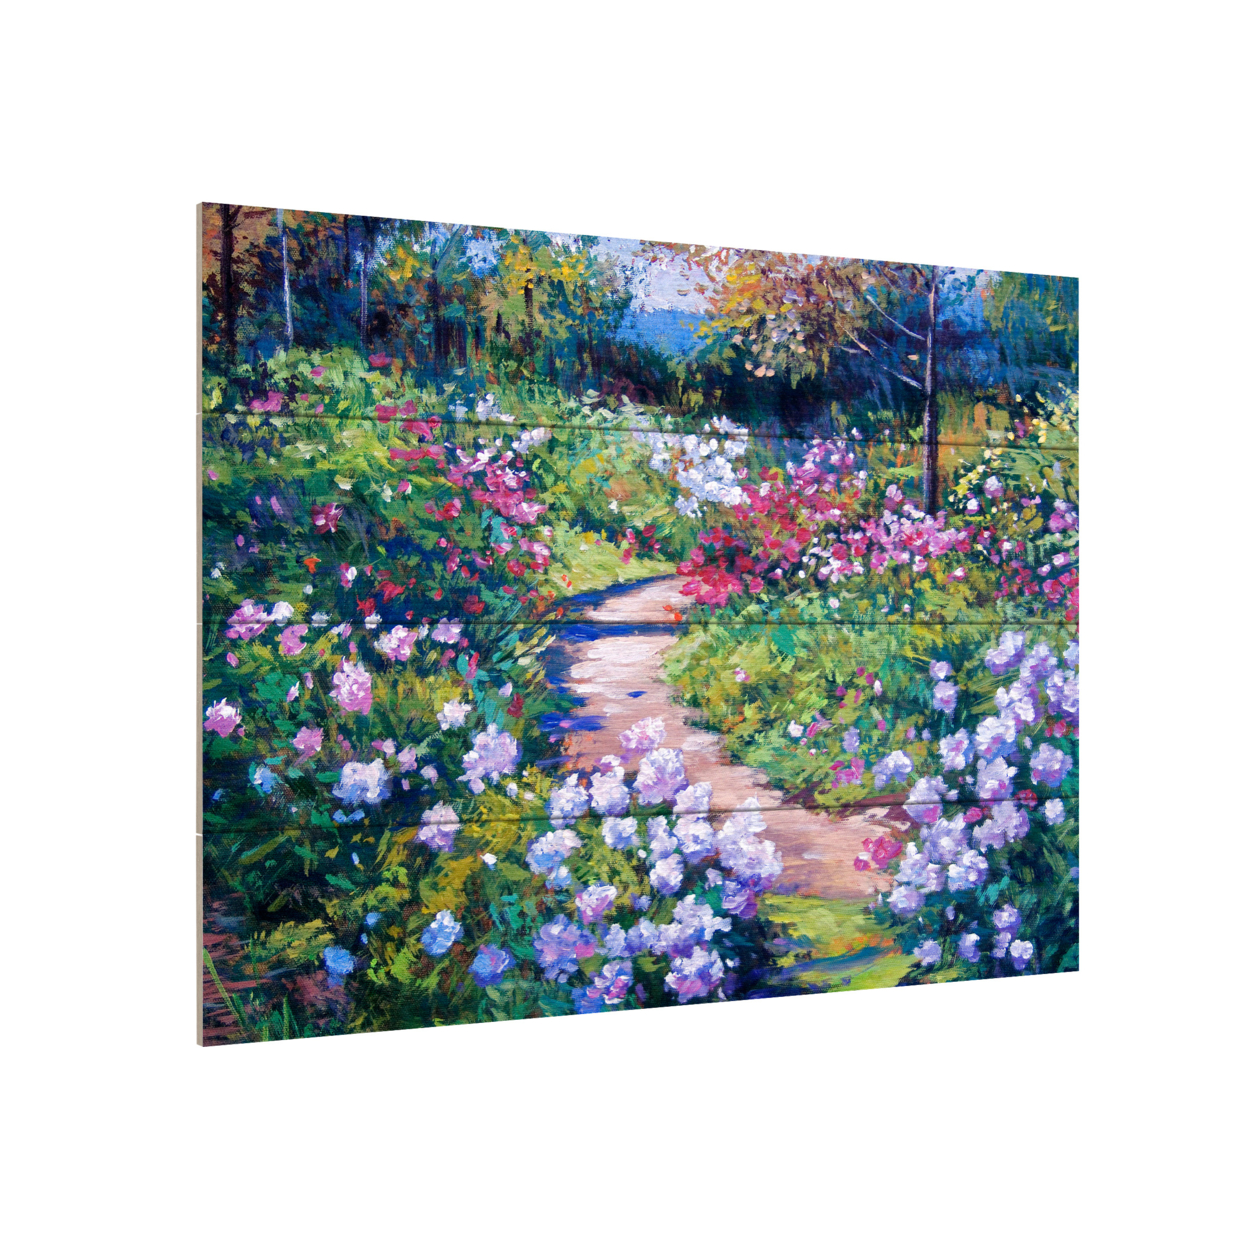 Wall Art 12 X 16 Inches Titled Natures Garden Ready To Hang Printed On Wooden Planks